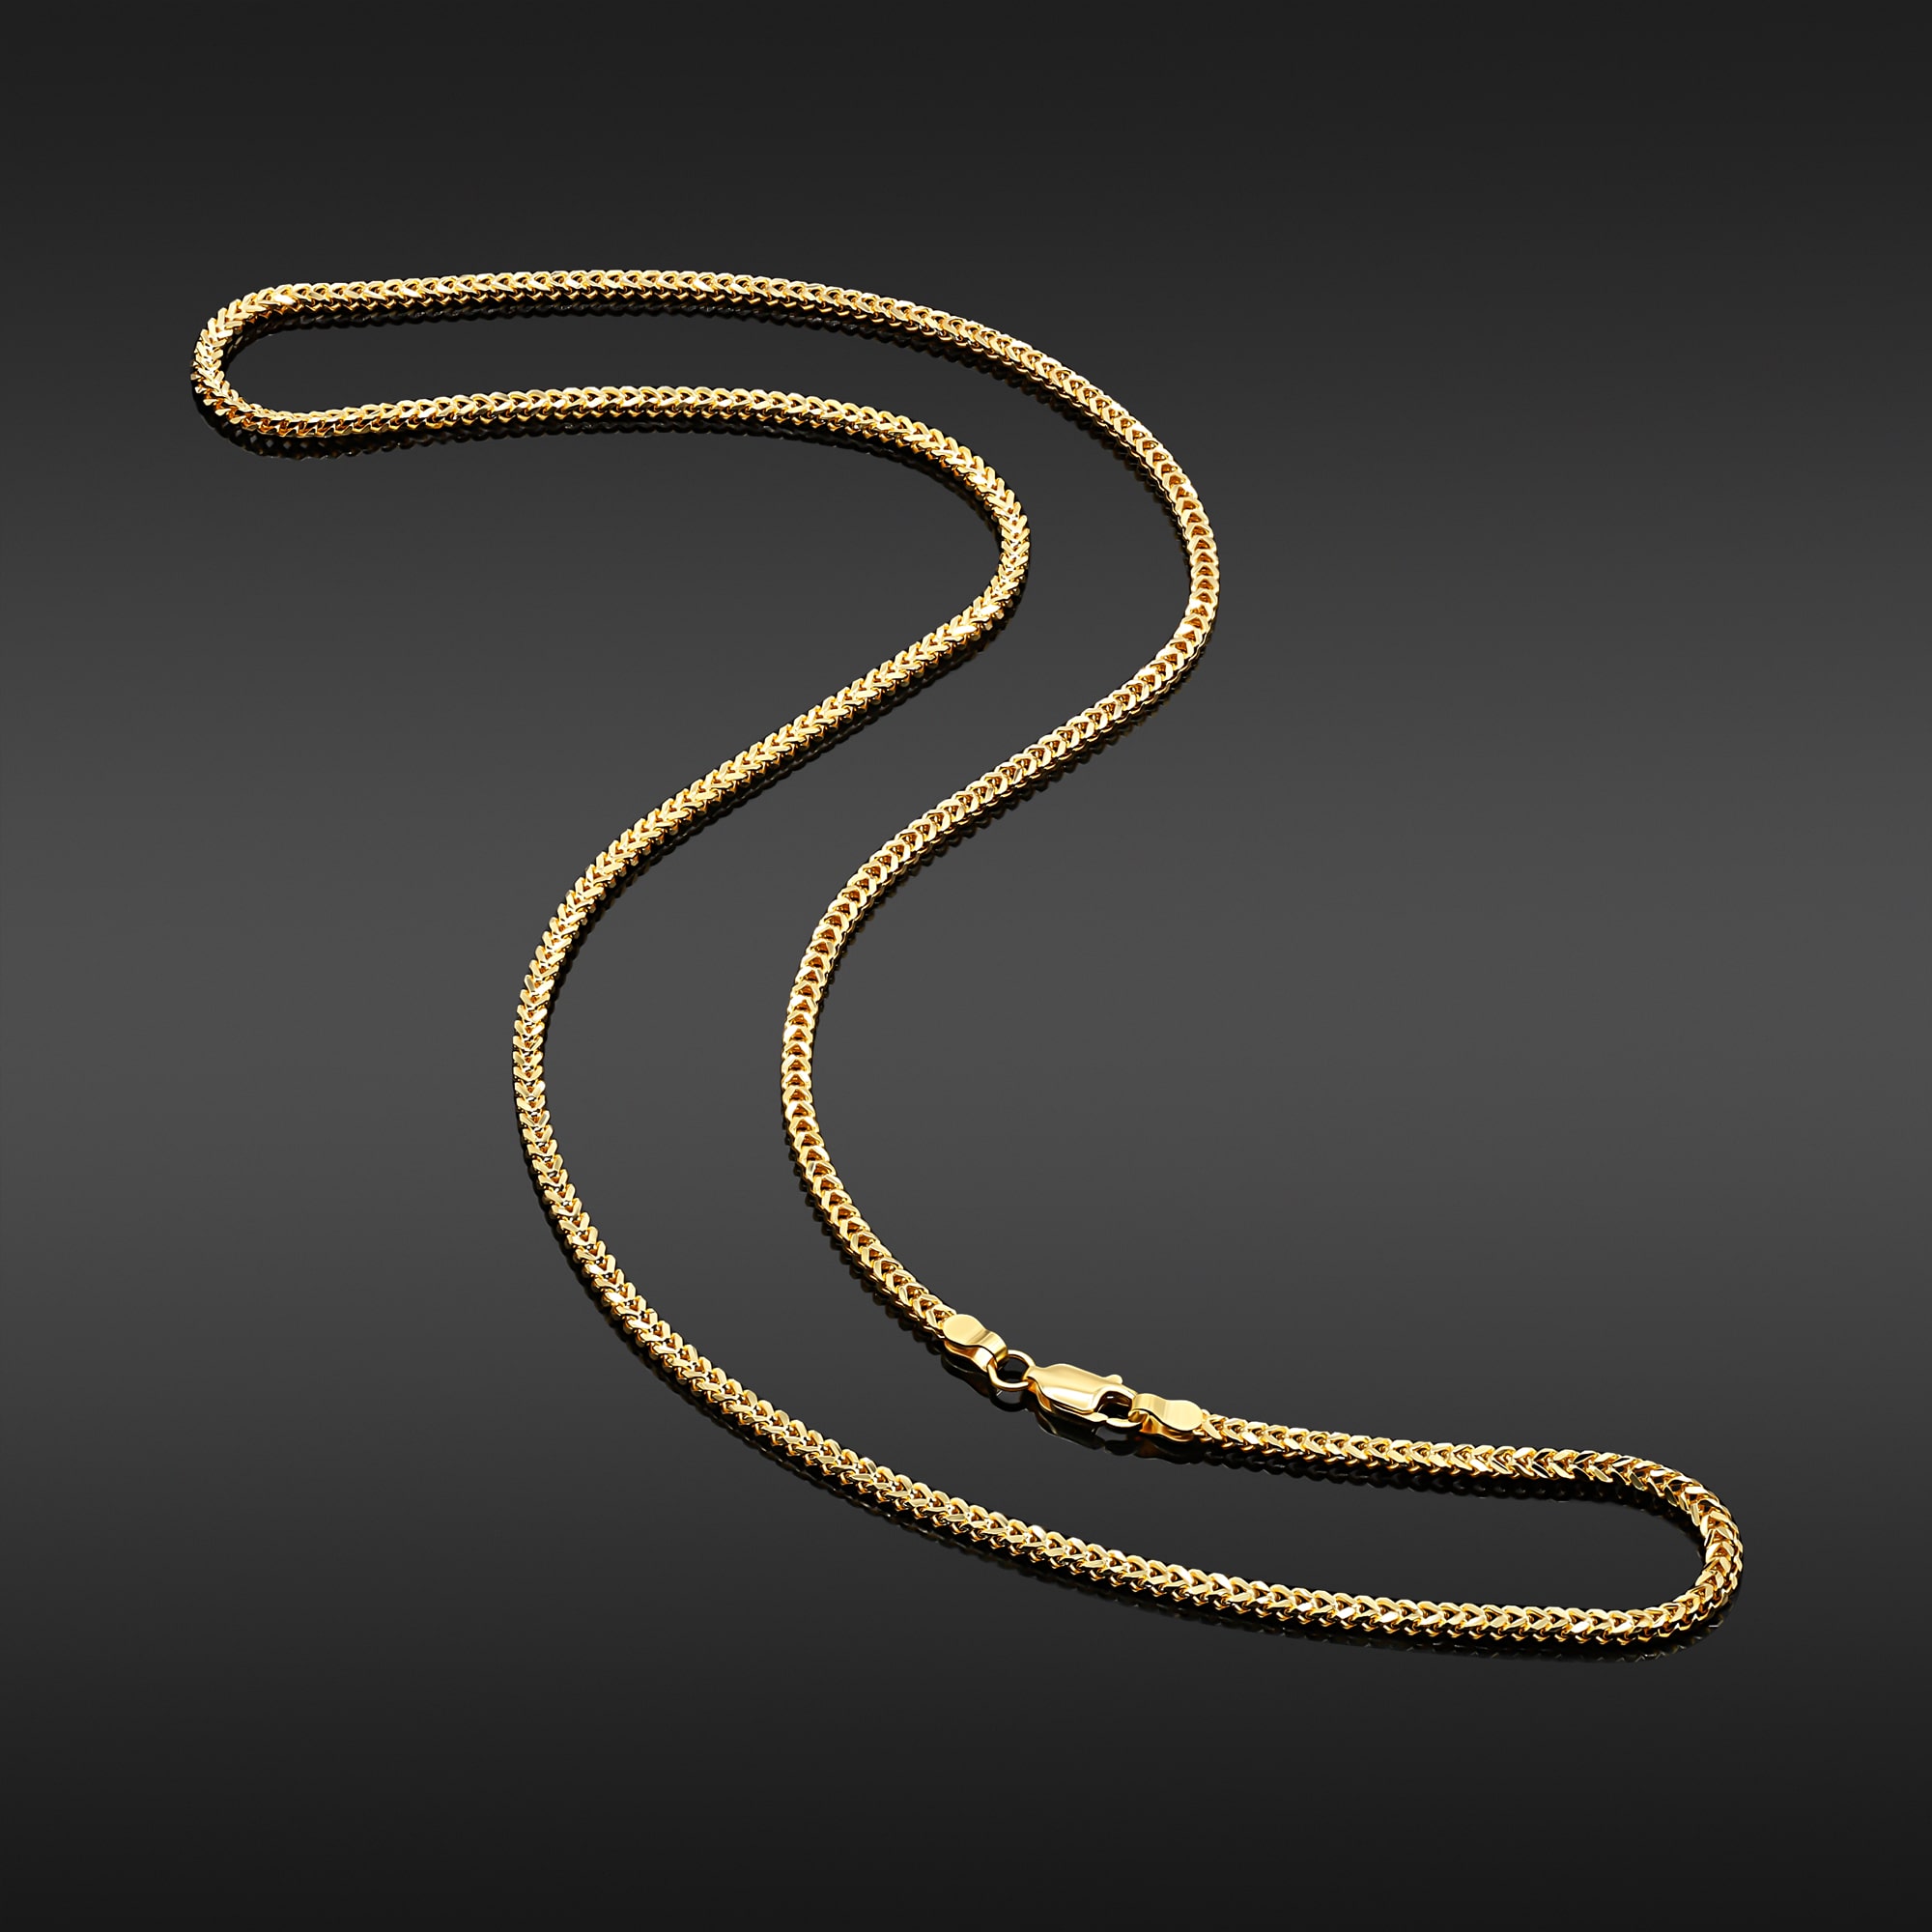 22K Gold Foxtail Chain – 22 Inch